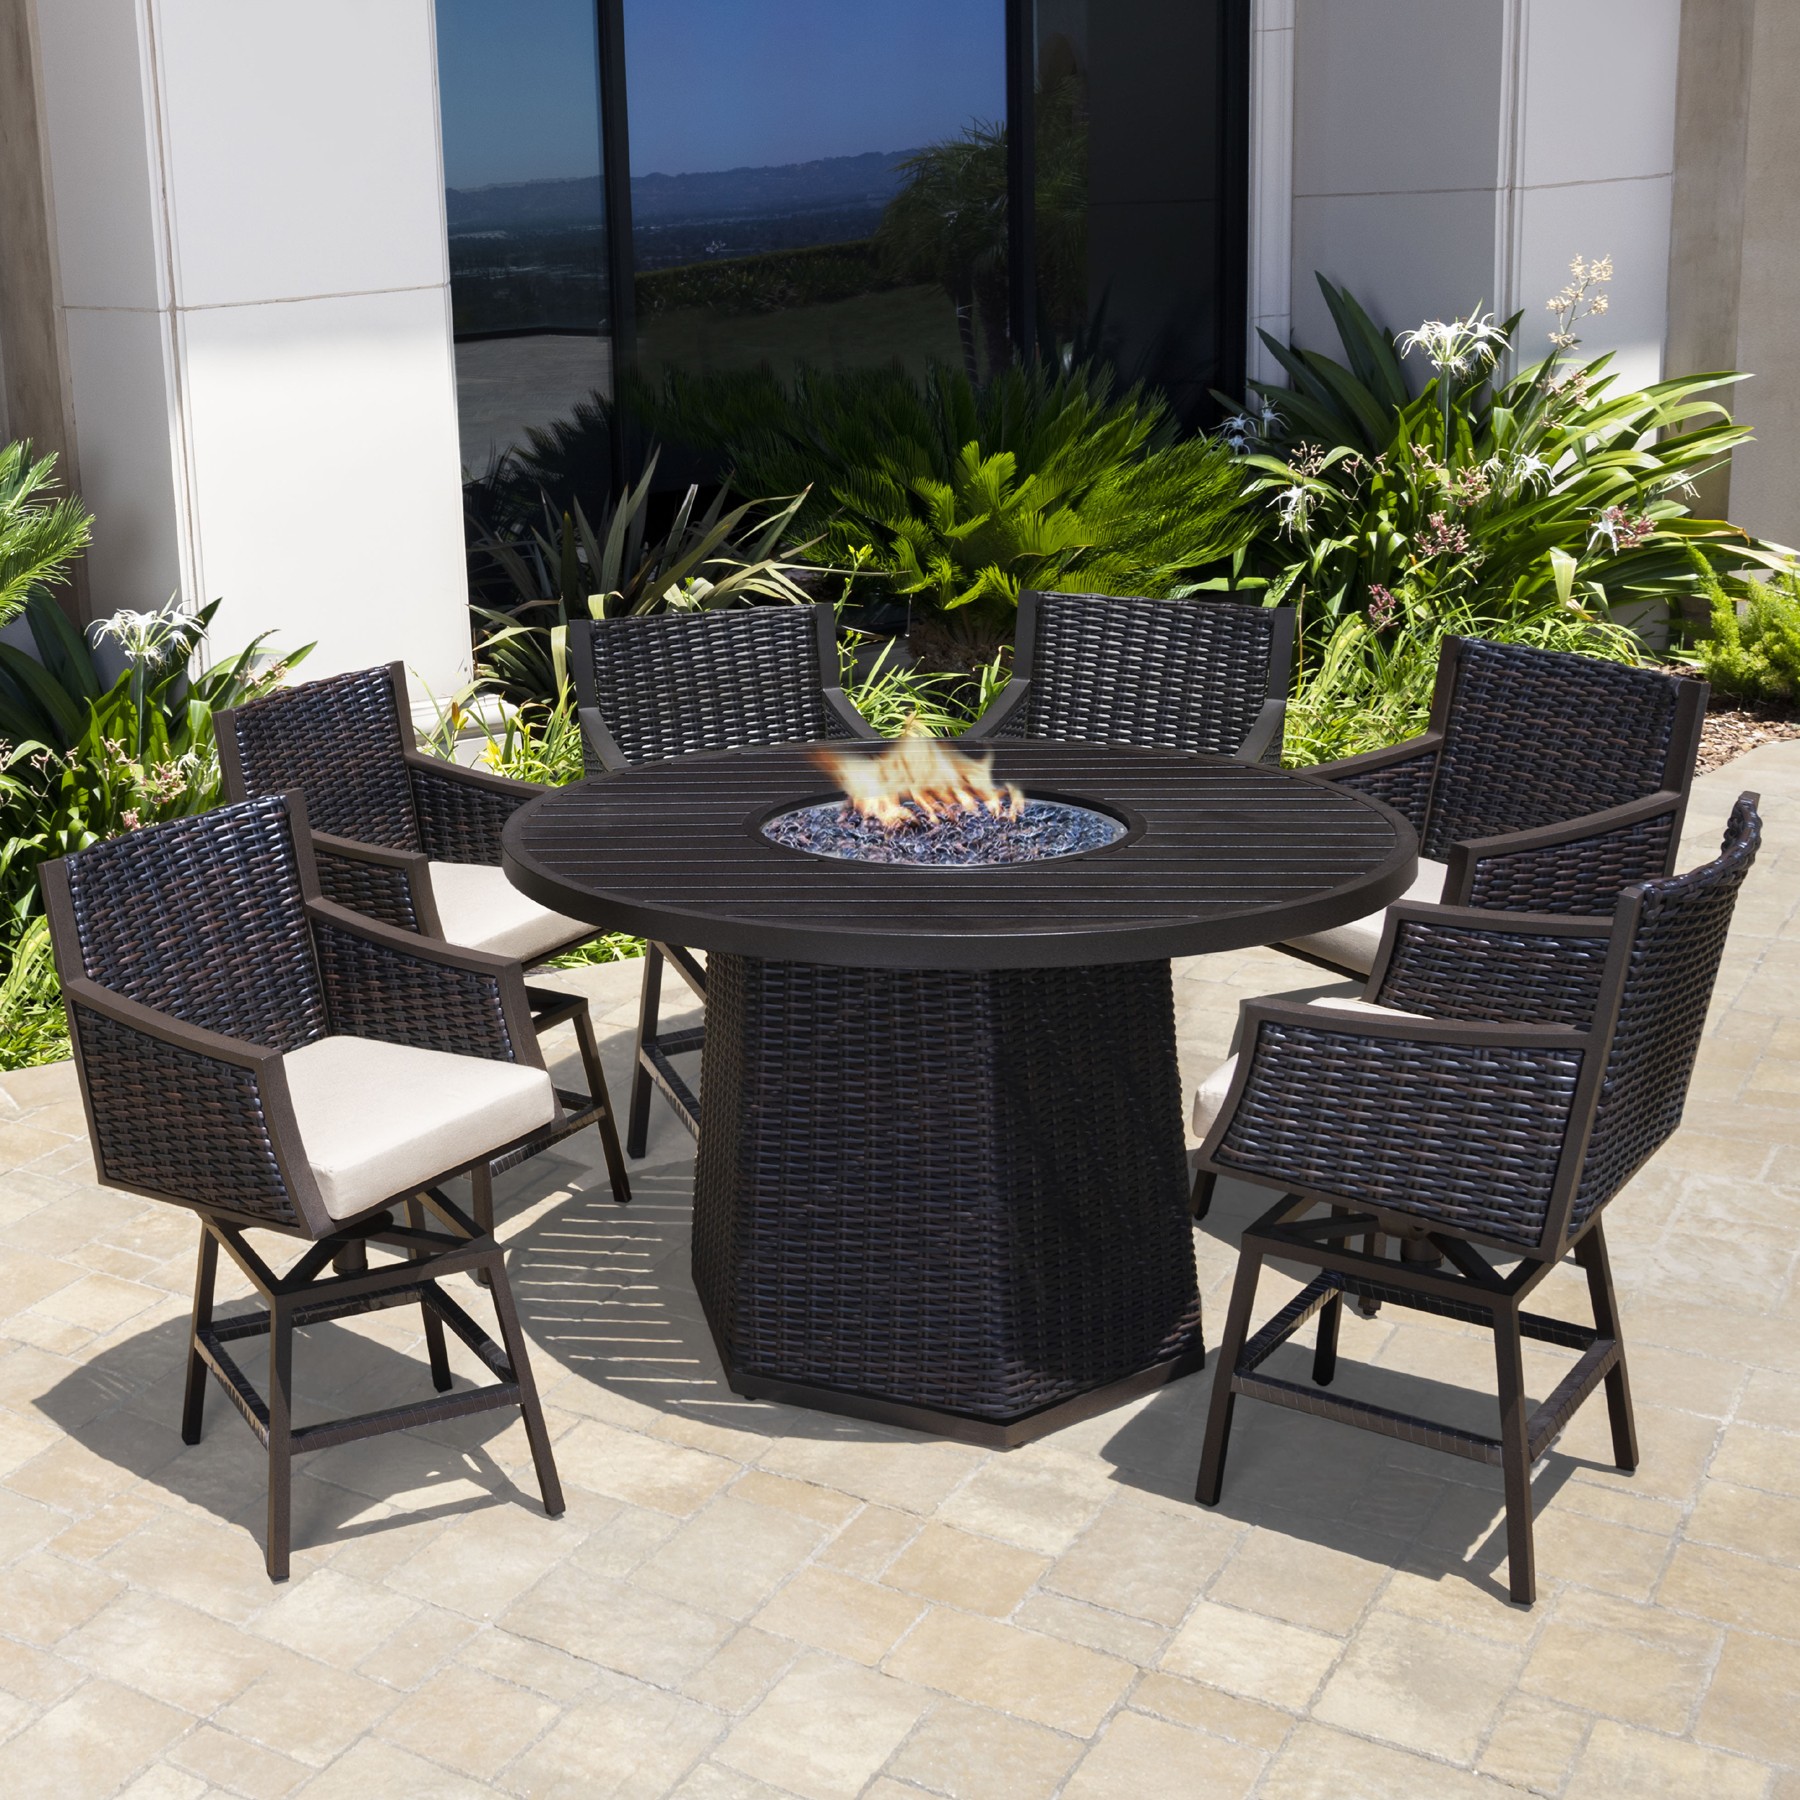 Cassara 7 Piece High Dining Set With, Tall Fire Pit Table With Chairs